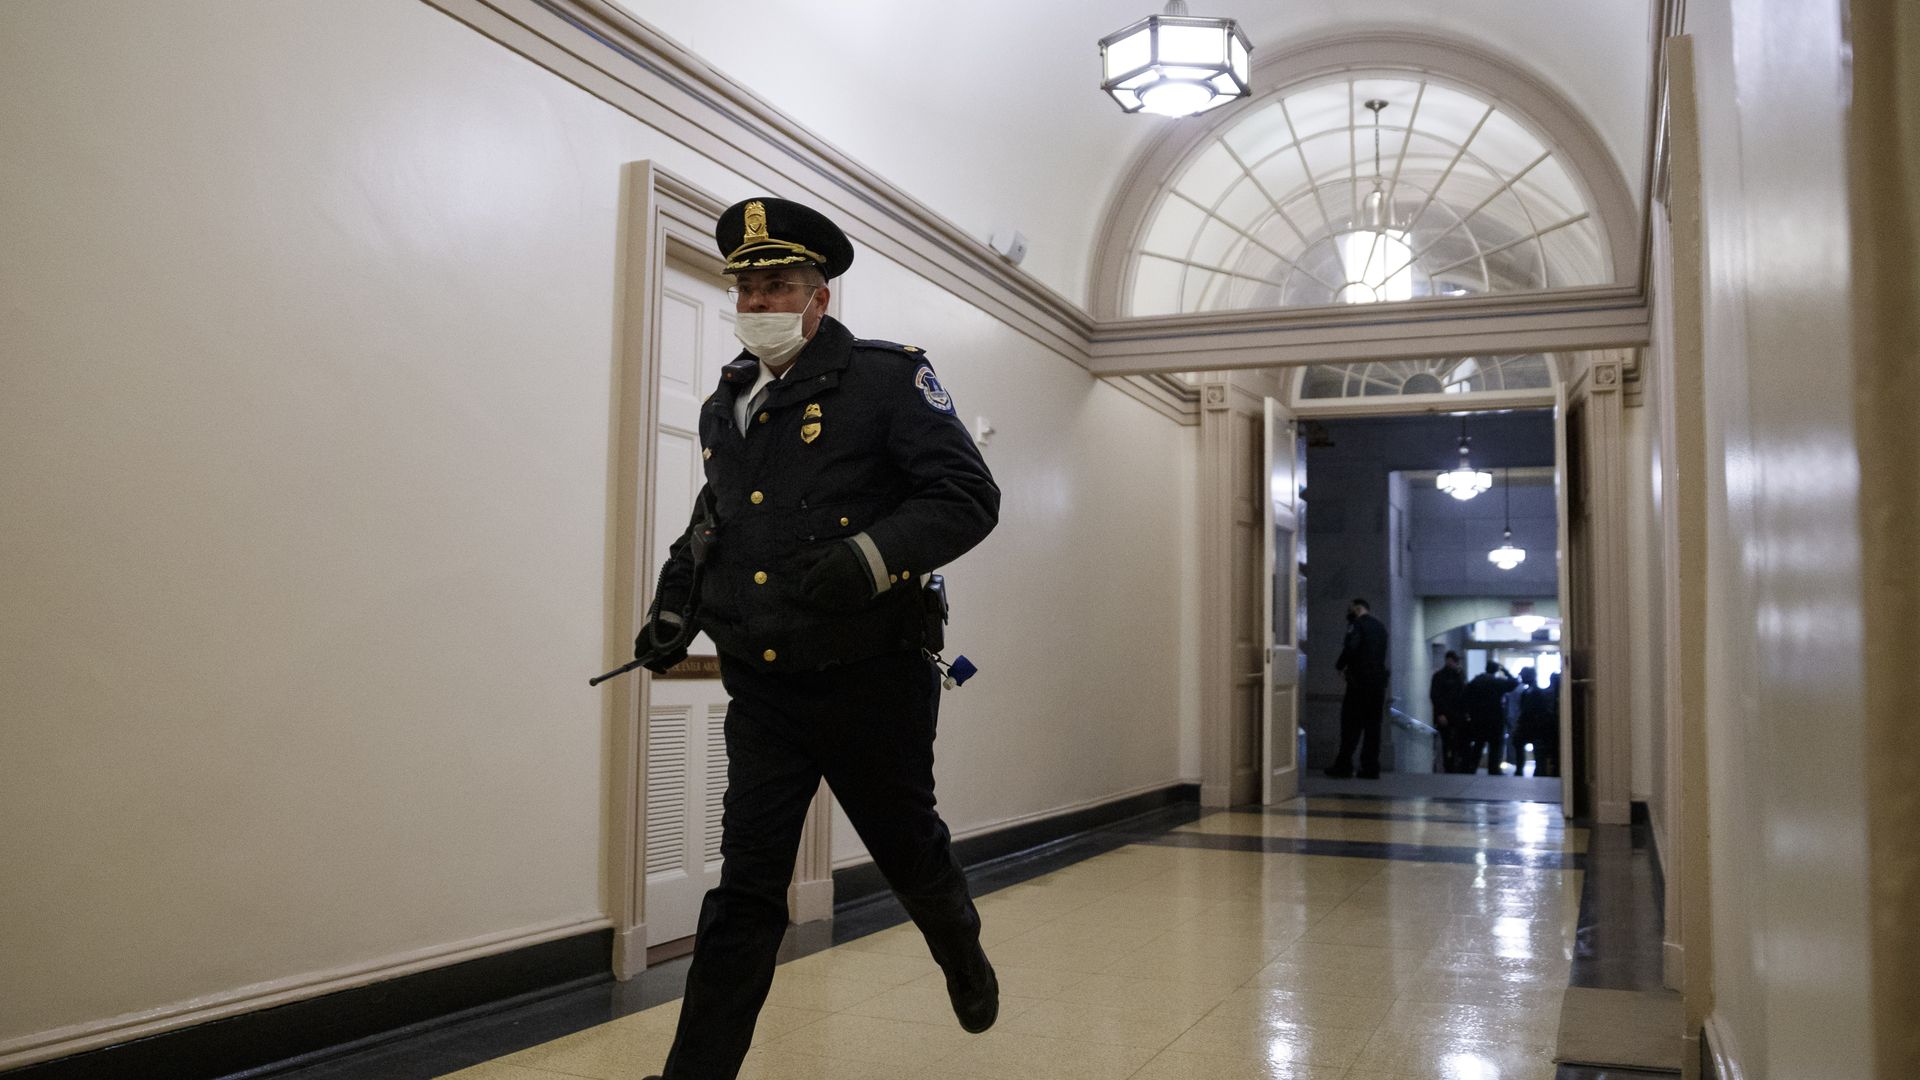 A members of the U.S. Capitol Police responds to demonstrators at the U.S. Capitol U.S. on Jan. 6, 2021.